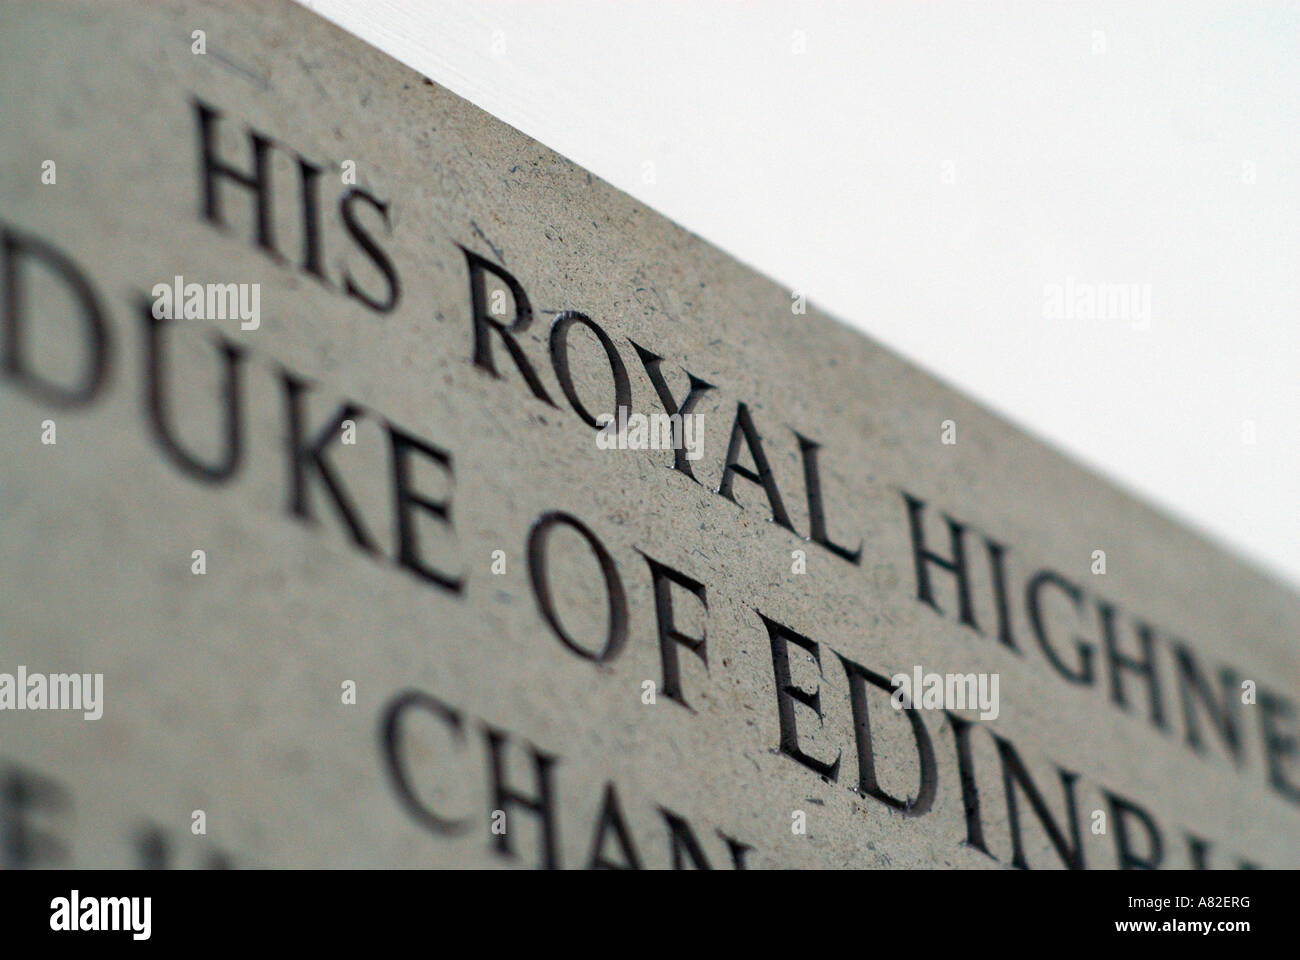 Plaque on wall to commemorate royal visit Stock Photo